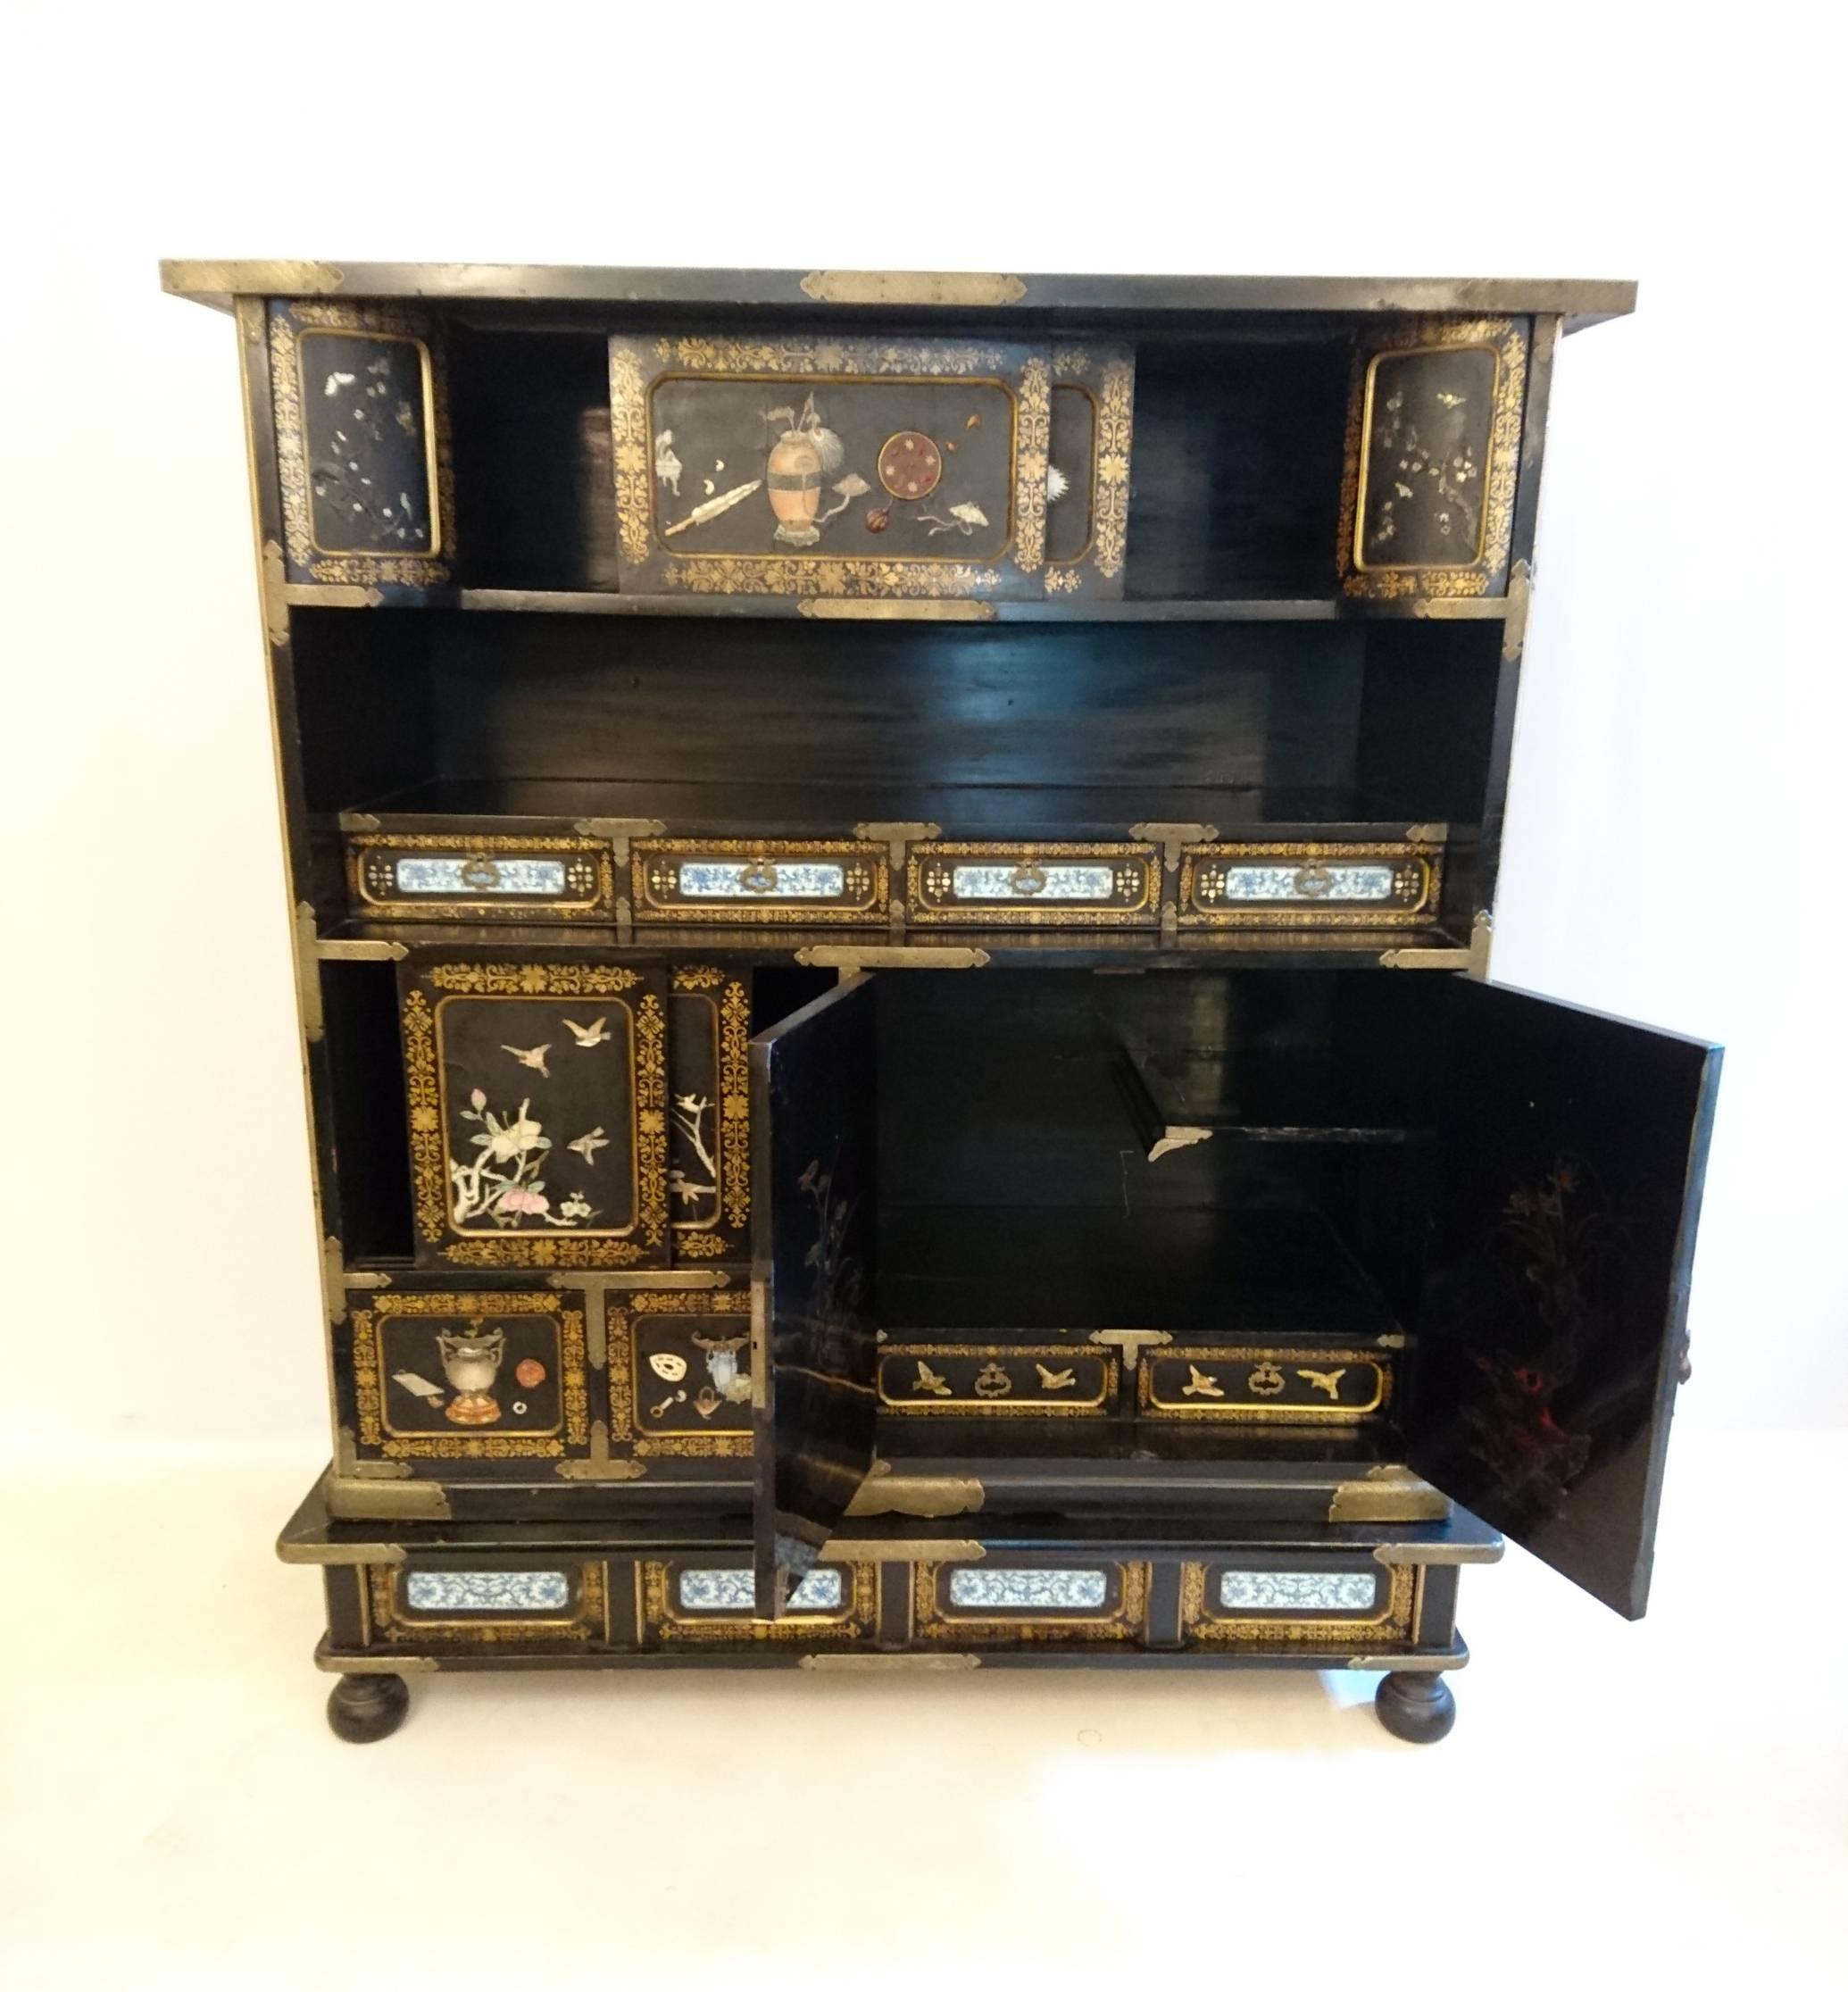 This Japanese Shibayama guilded cabinet from the Japanese Meiji period with cabinets, doors and shelves. With decor depicting animals and various instruments in bronze, porcelain, mother of pearl, bone etc. The two largest doors have decor of